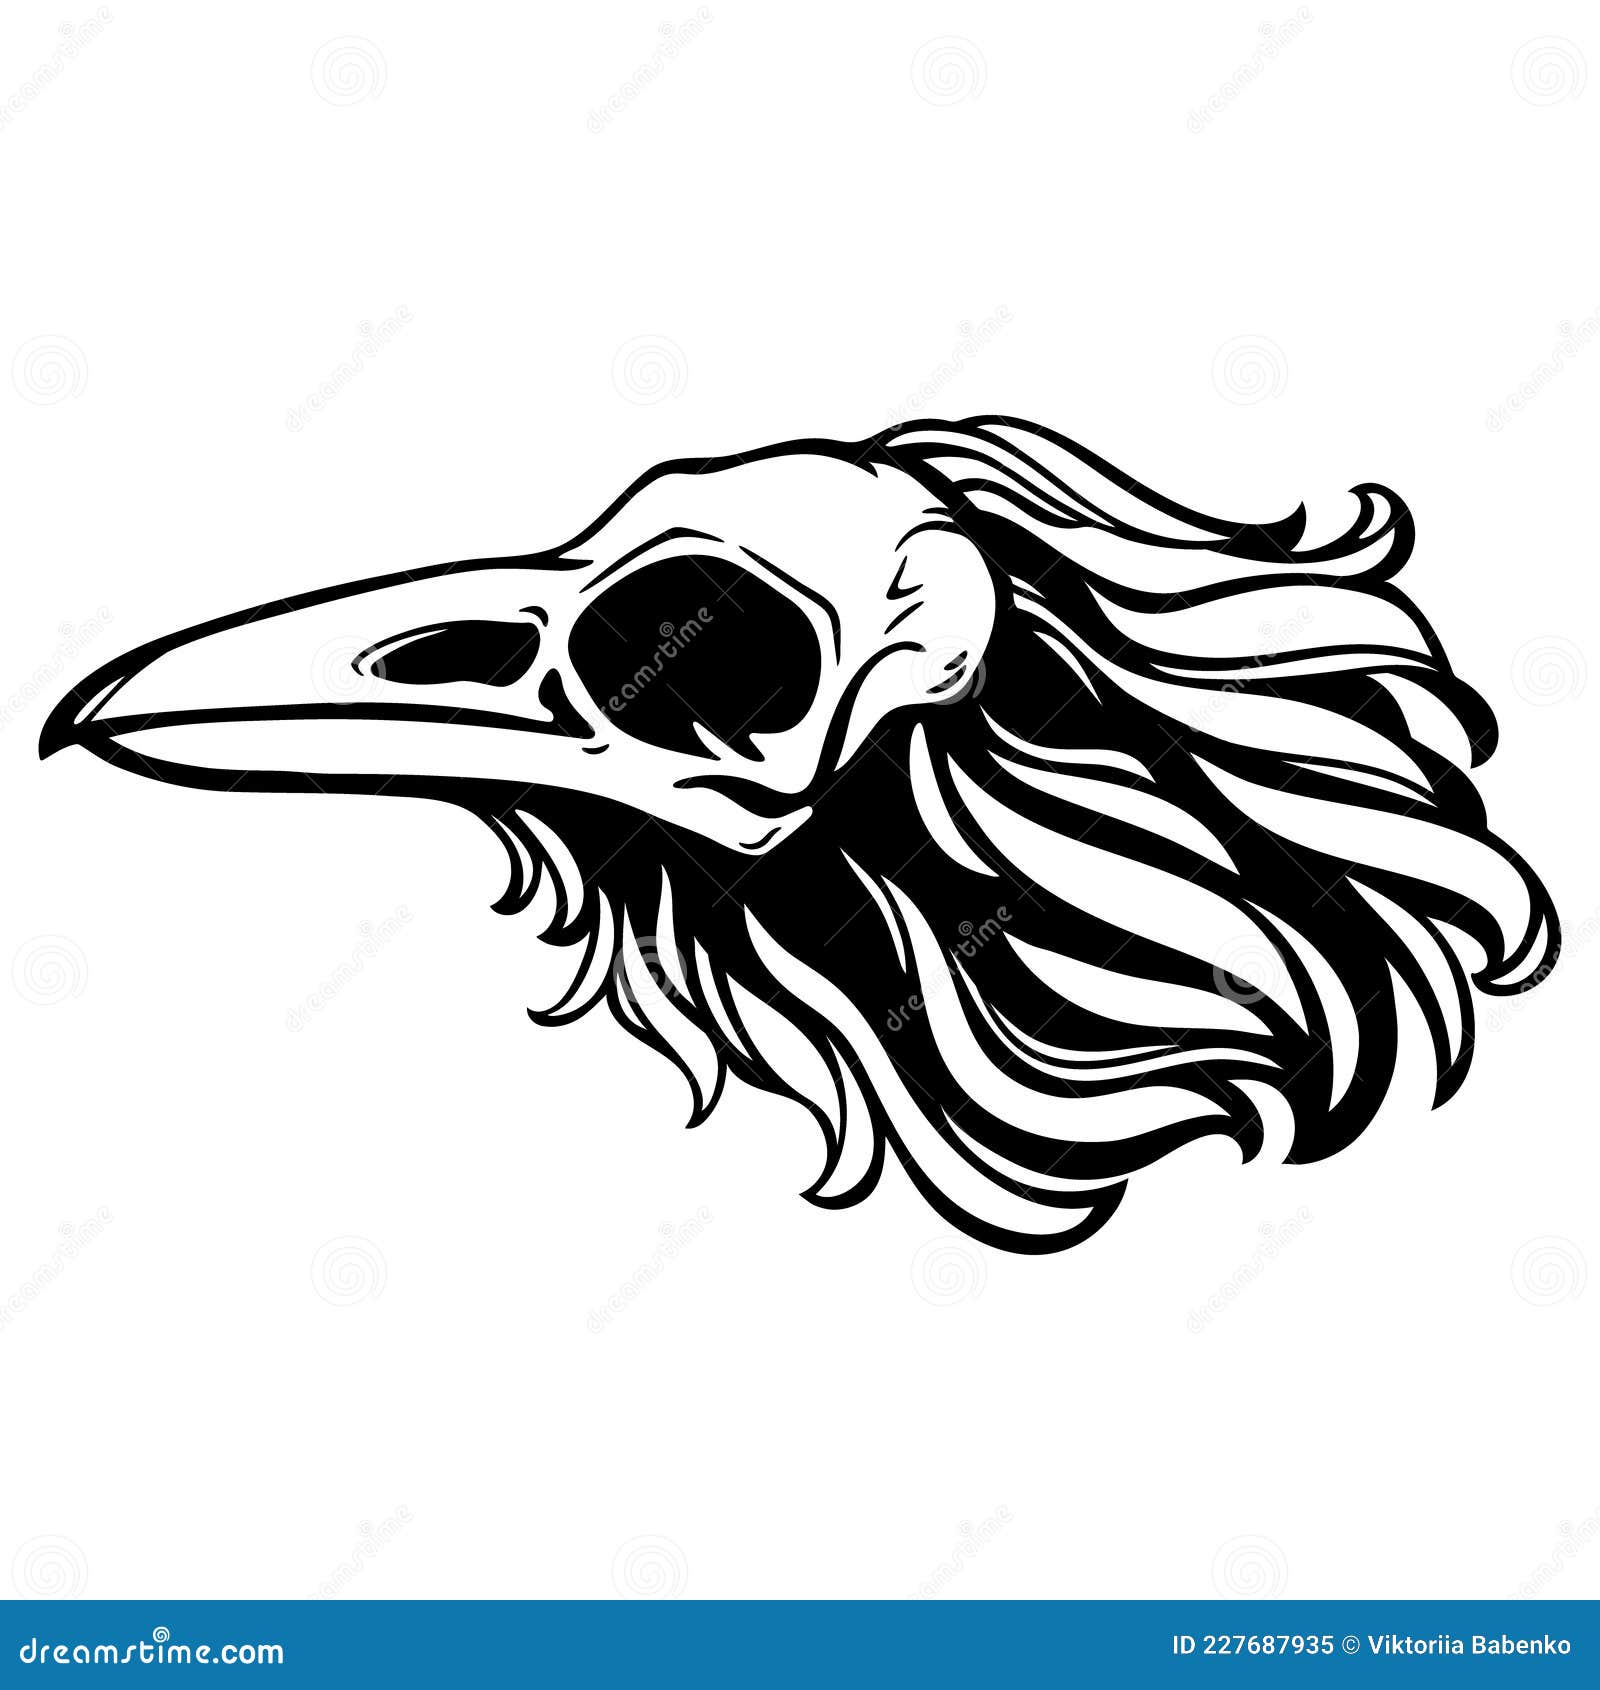 Dead Bird Skull with Feathers Stock Vector - Illustration of background,  graphic: 227687935